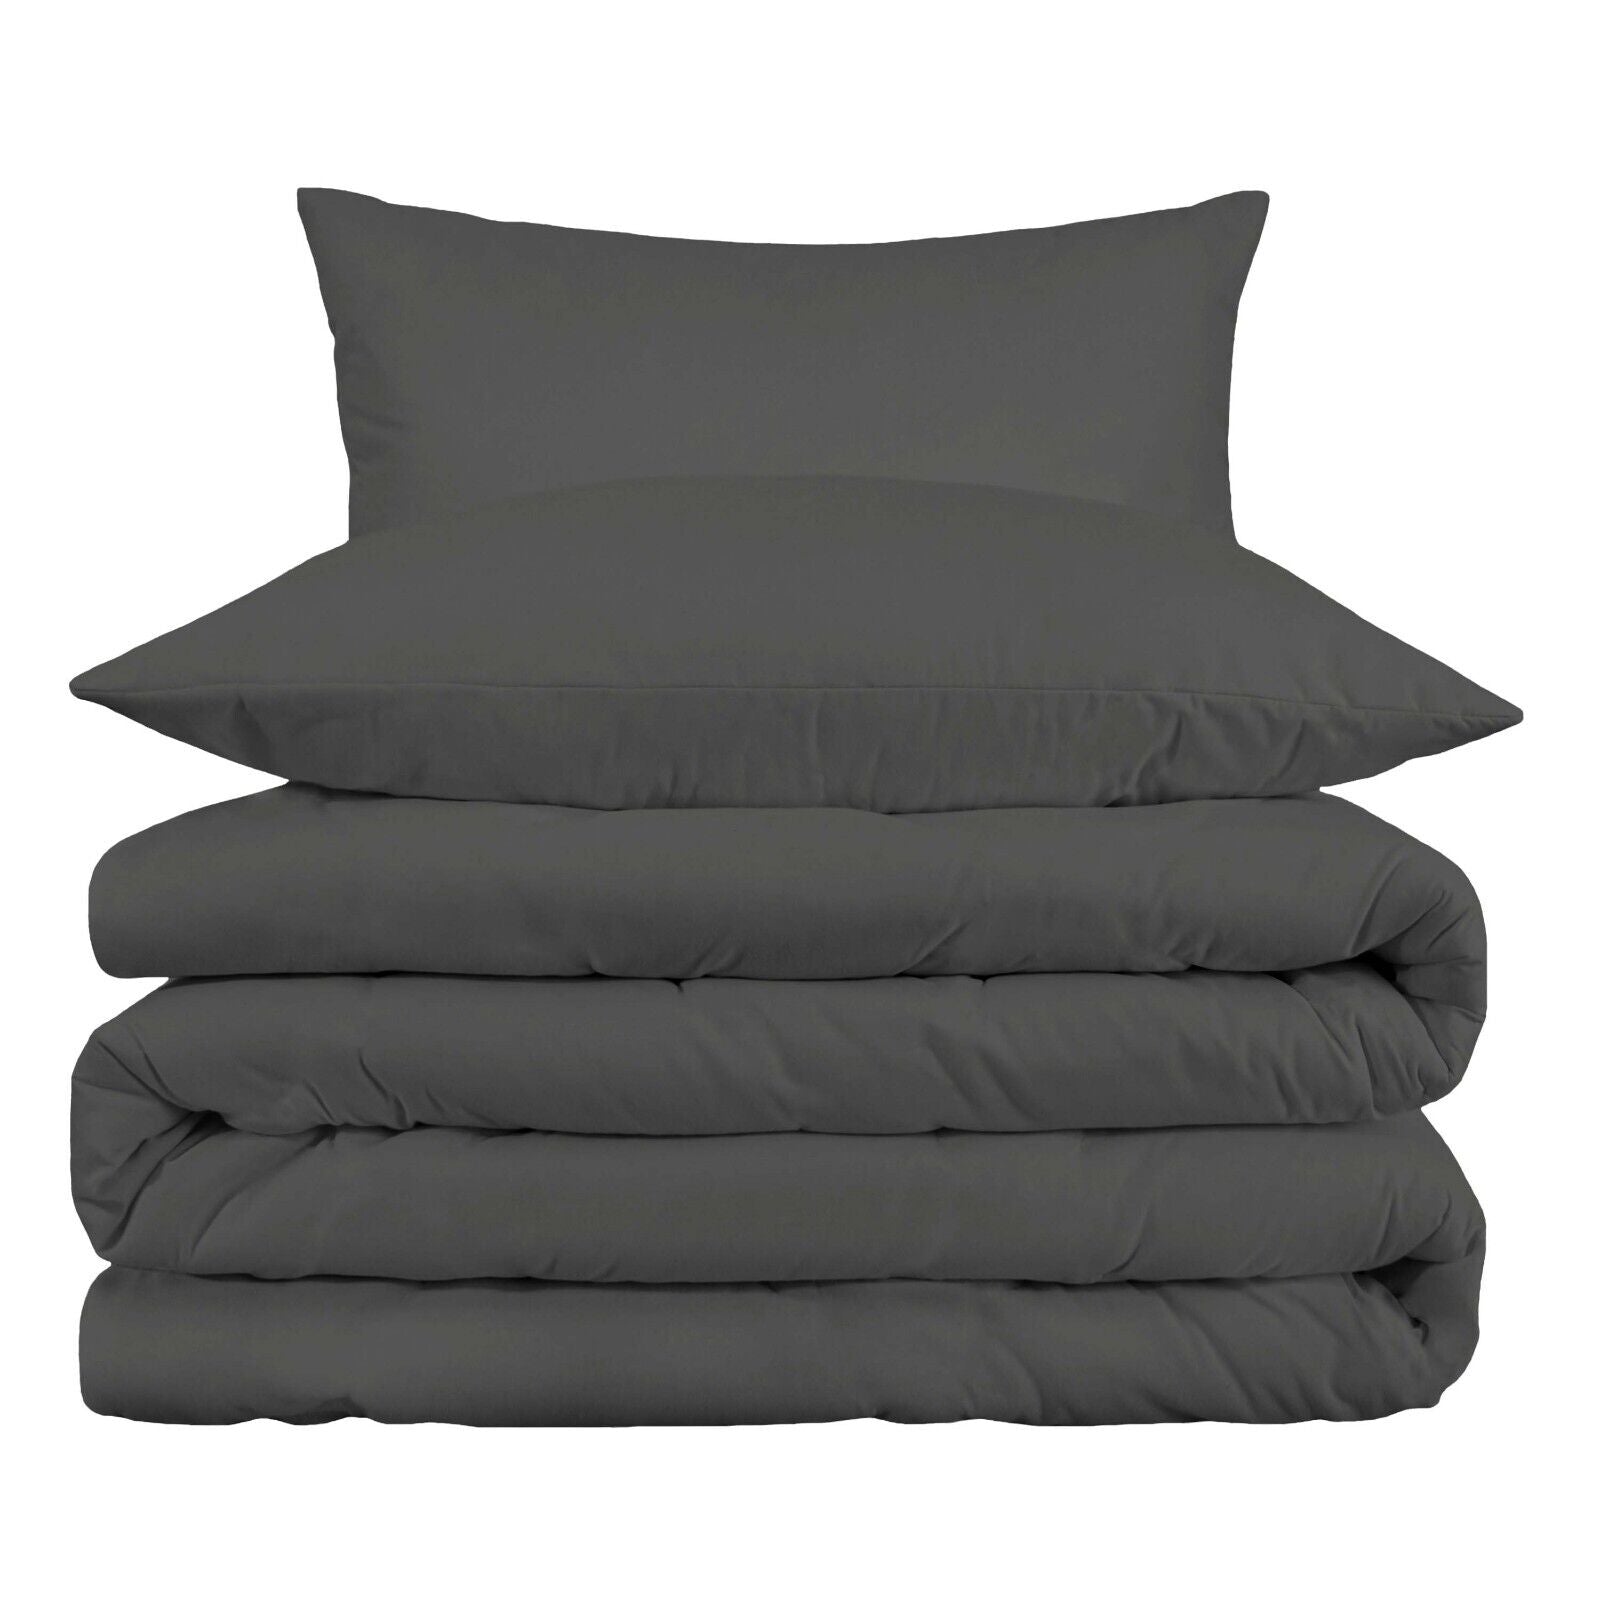 Superior Egyptian Cotton Solid All-Season Duvet Cover Set with Button Closure - Charcoal